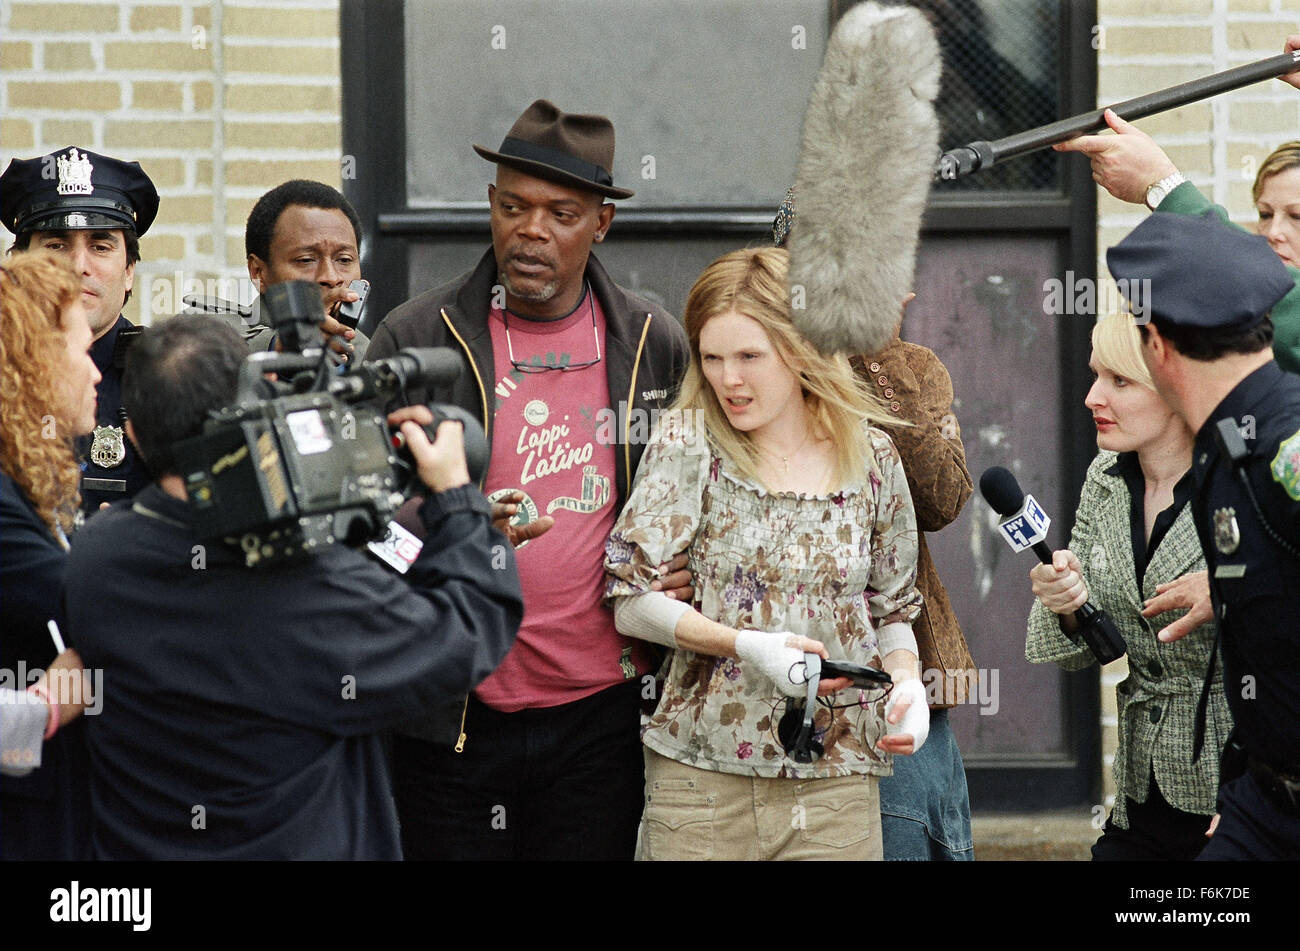 Feb 14, 2006; New York, NY, USA; SAMUEL L. JACKSON (center) as Lorenzo Council and JULIANNE MOORE (center) as Brenda Martin in the crime, drama, mystery, thriller film Freedomland directed by Joe Roth, to be released Feb. 17th, 2006. Mandatory Credit: Photo by Sony Pictures. (Ac) Copyright 2006 by Courtesy of Sony Pictures Stock Photo